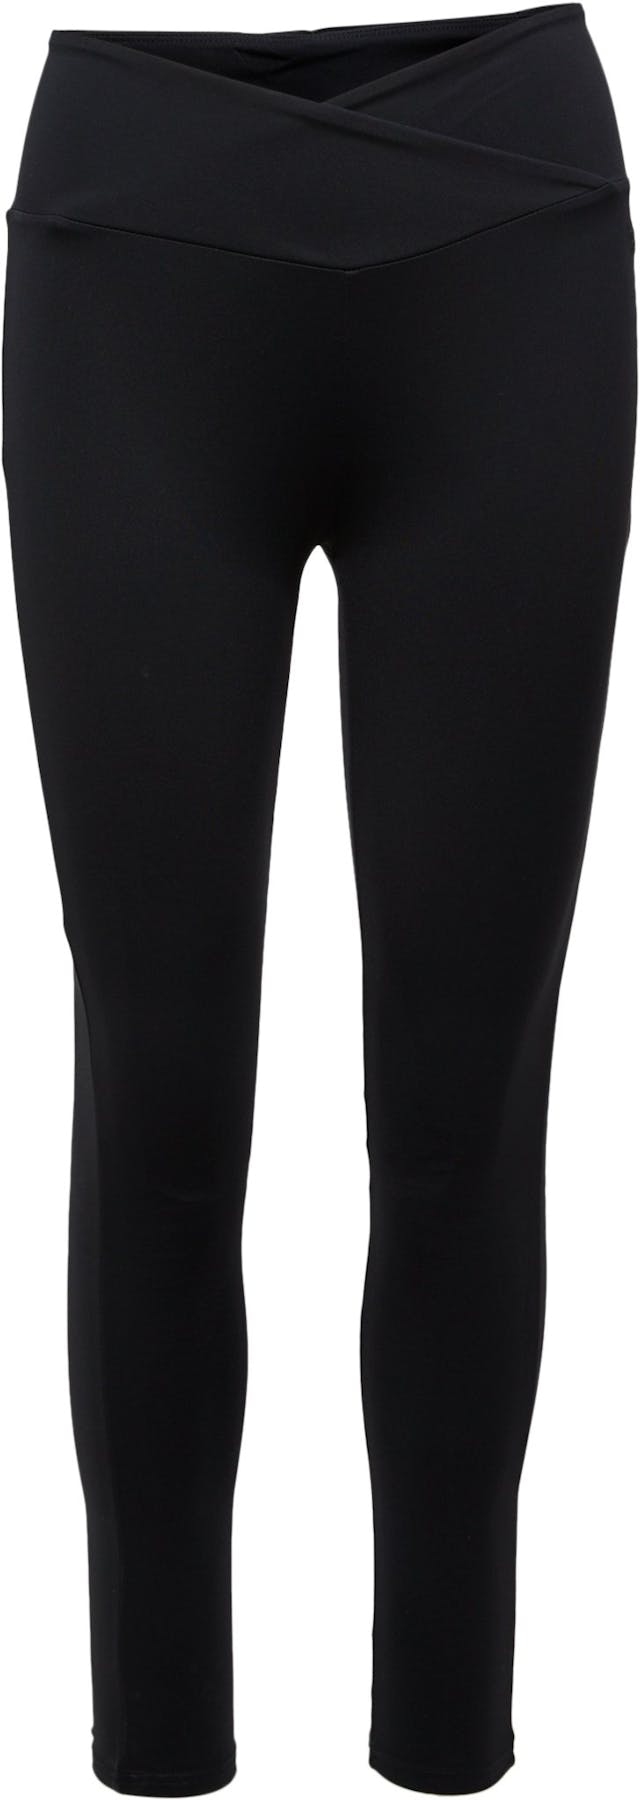 Product image for Core Wrap Legging - Women's